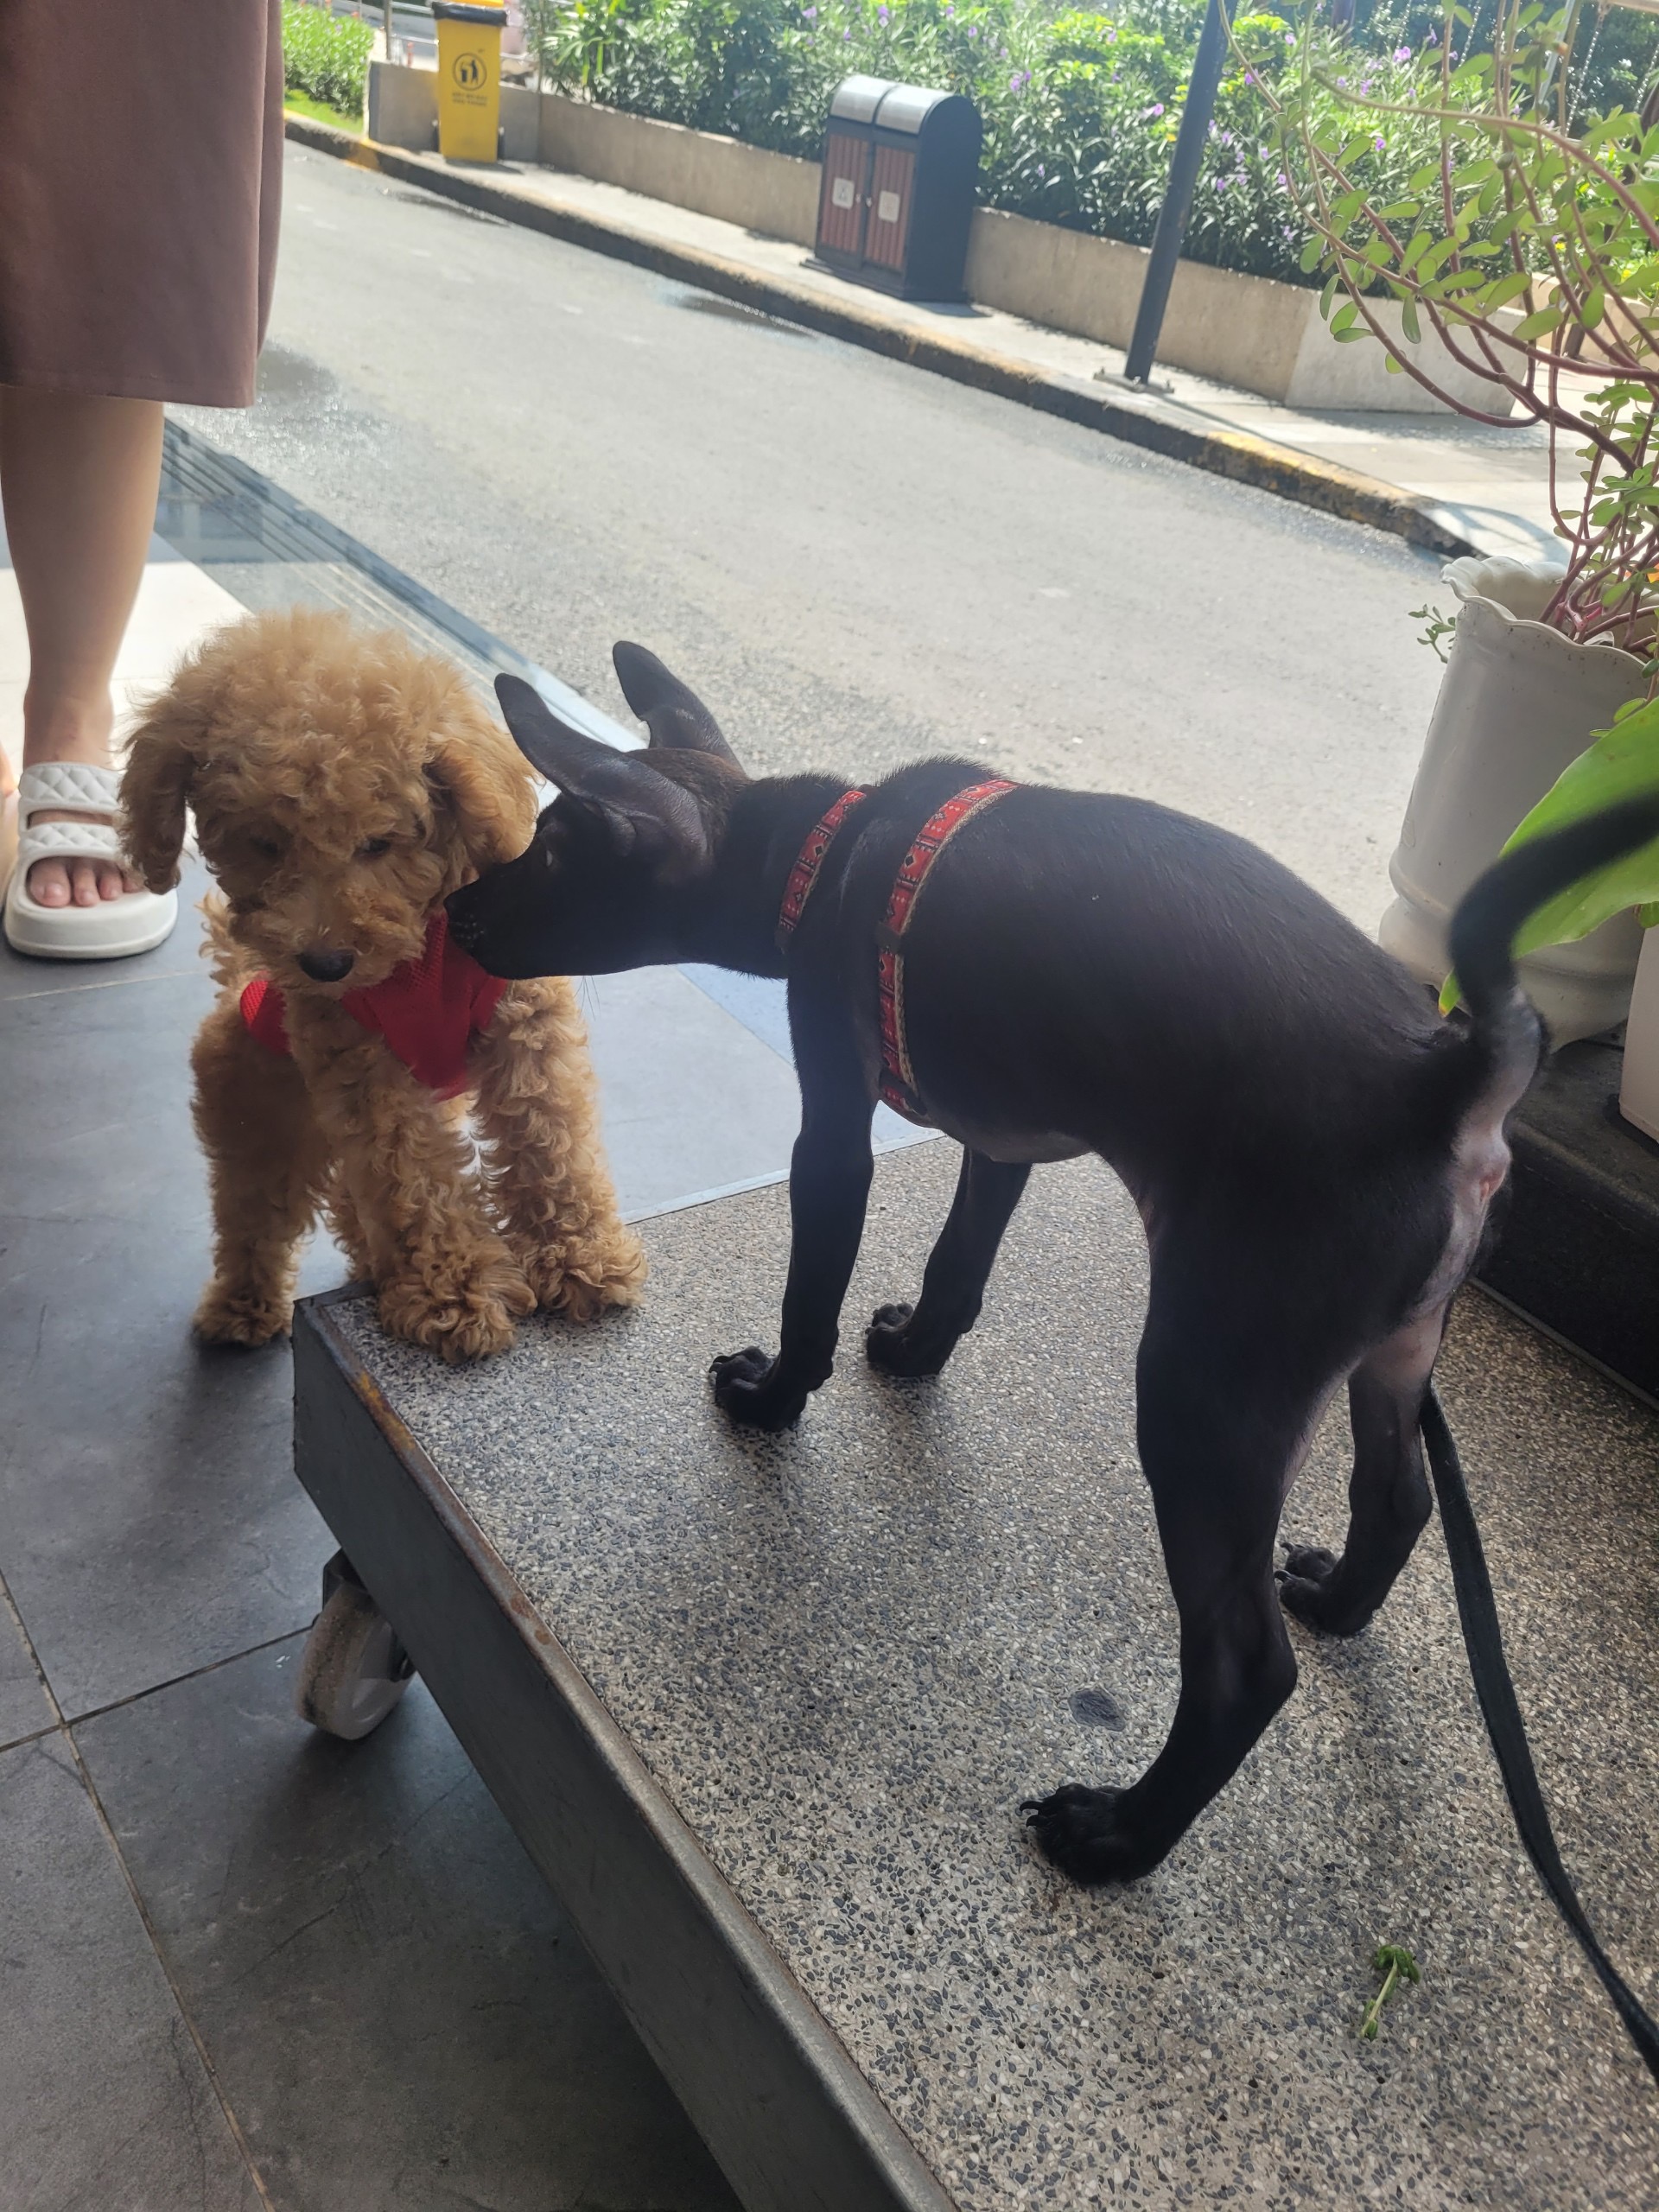 Mun (right) plays with another pet dog at a cafe in Binh Thanh District, Ho Chi Minh City. Photo: Ray Kuschert / Tuoi Tre News